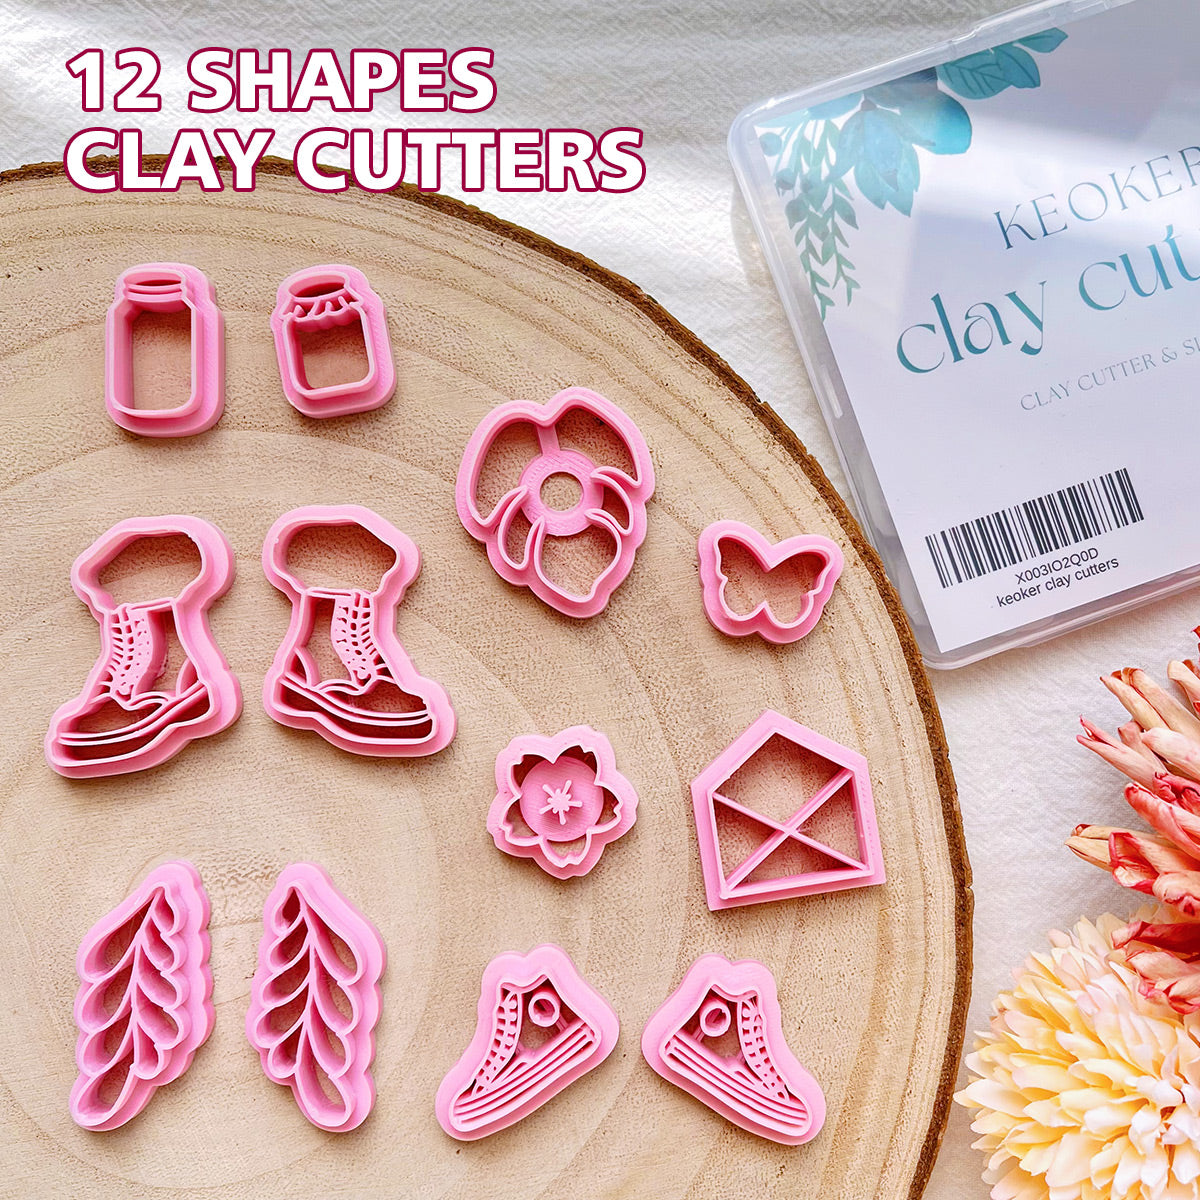 KEOKER Clay Cutters for Polymer Clay Jewelry(Potted Plant Clay Cutters 2)